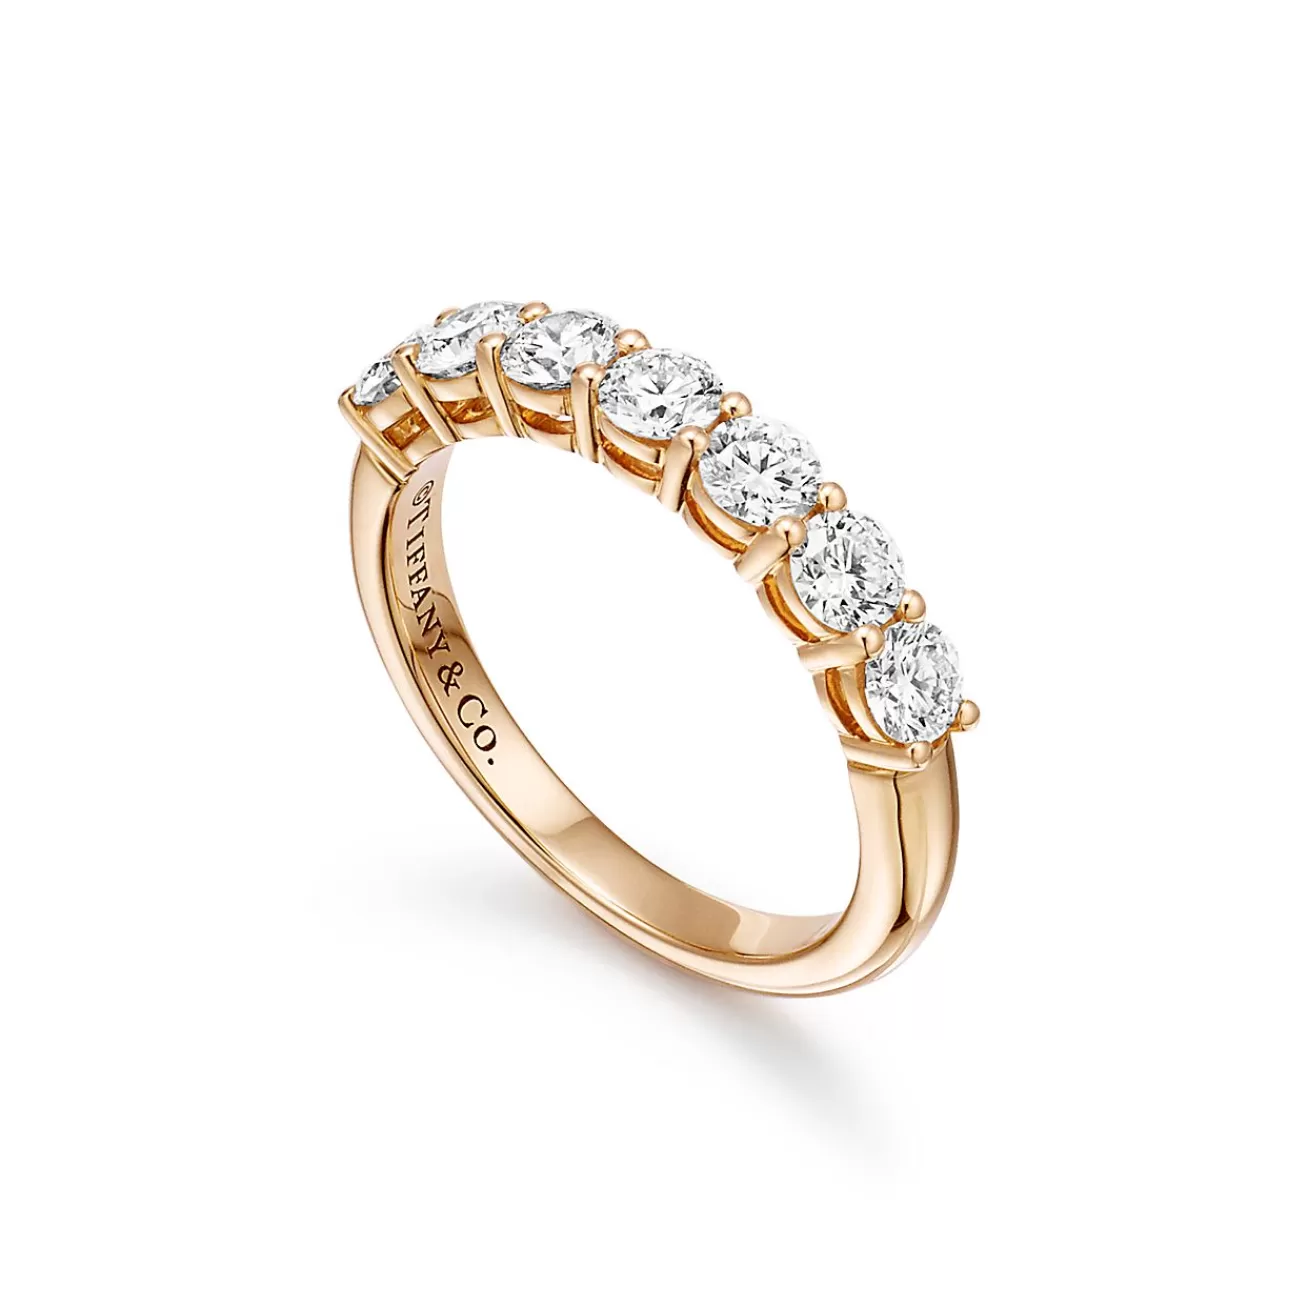 Tiffany & Co. Tiffany Forever Band Ring in Yellow Gold with a Half-circle of Diamonds, 3.5 mm | ^Women Rings | Stacking Rings